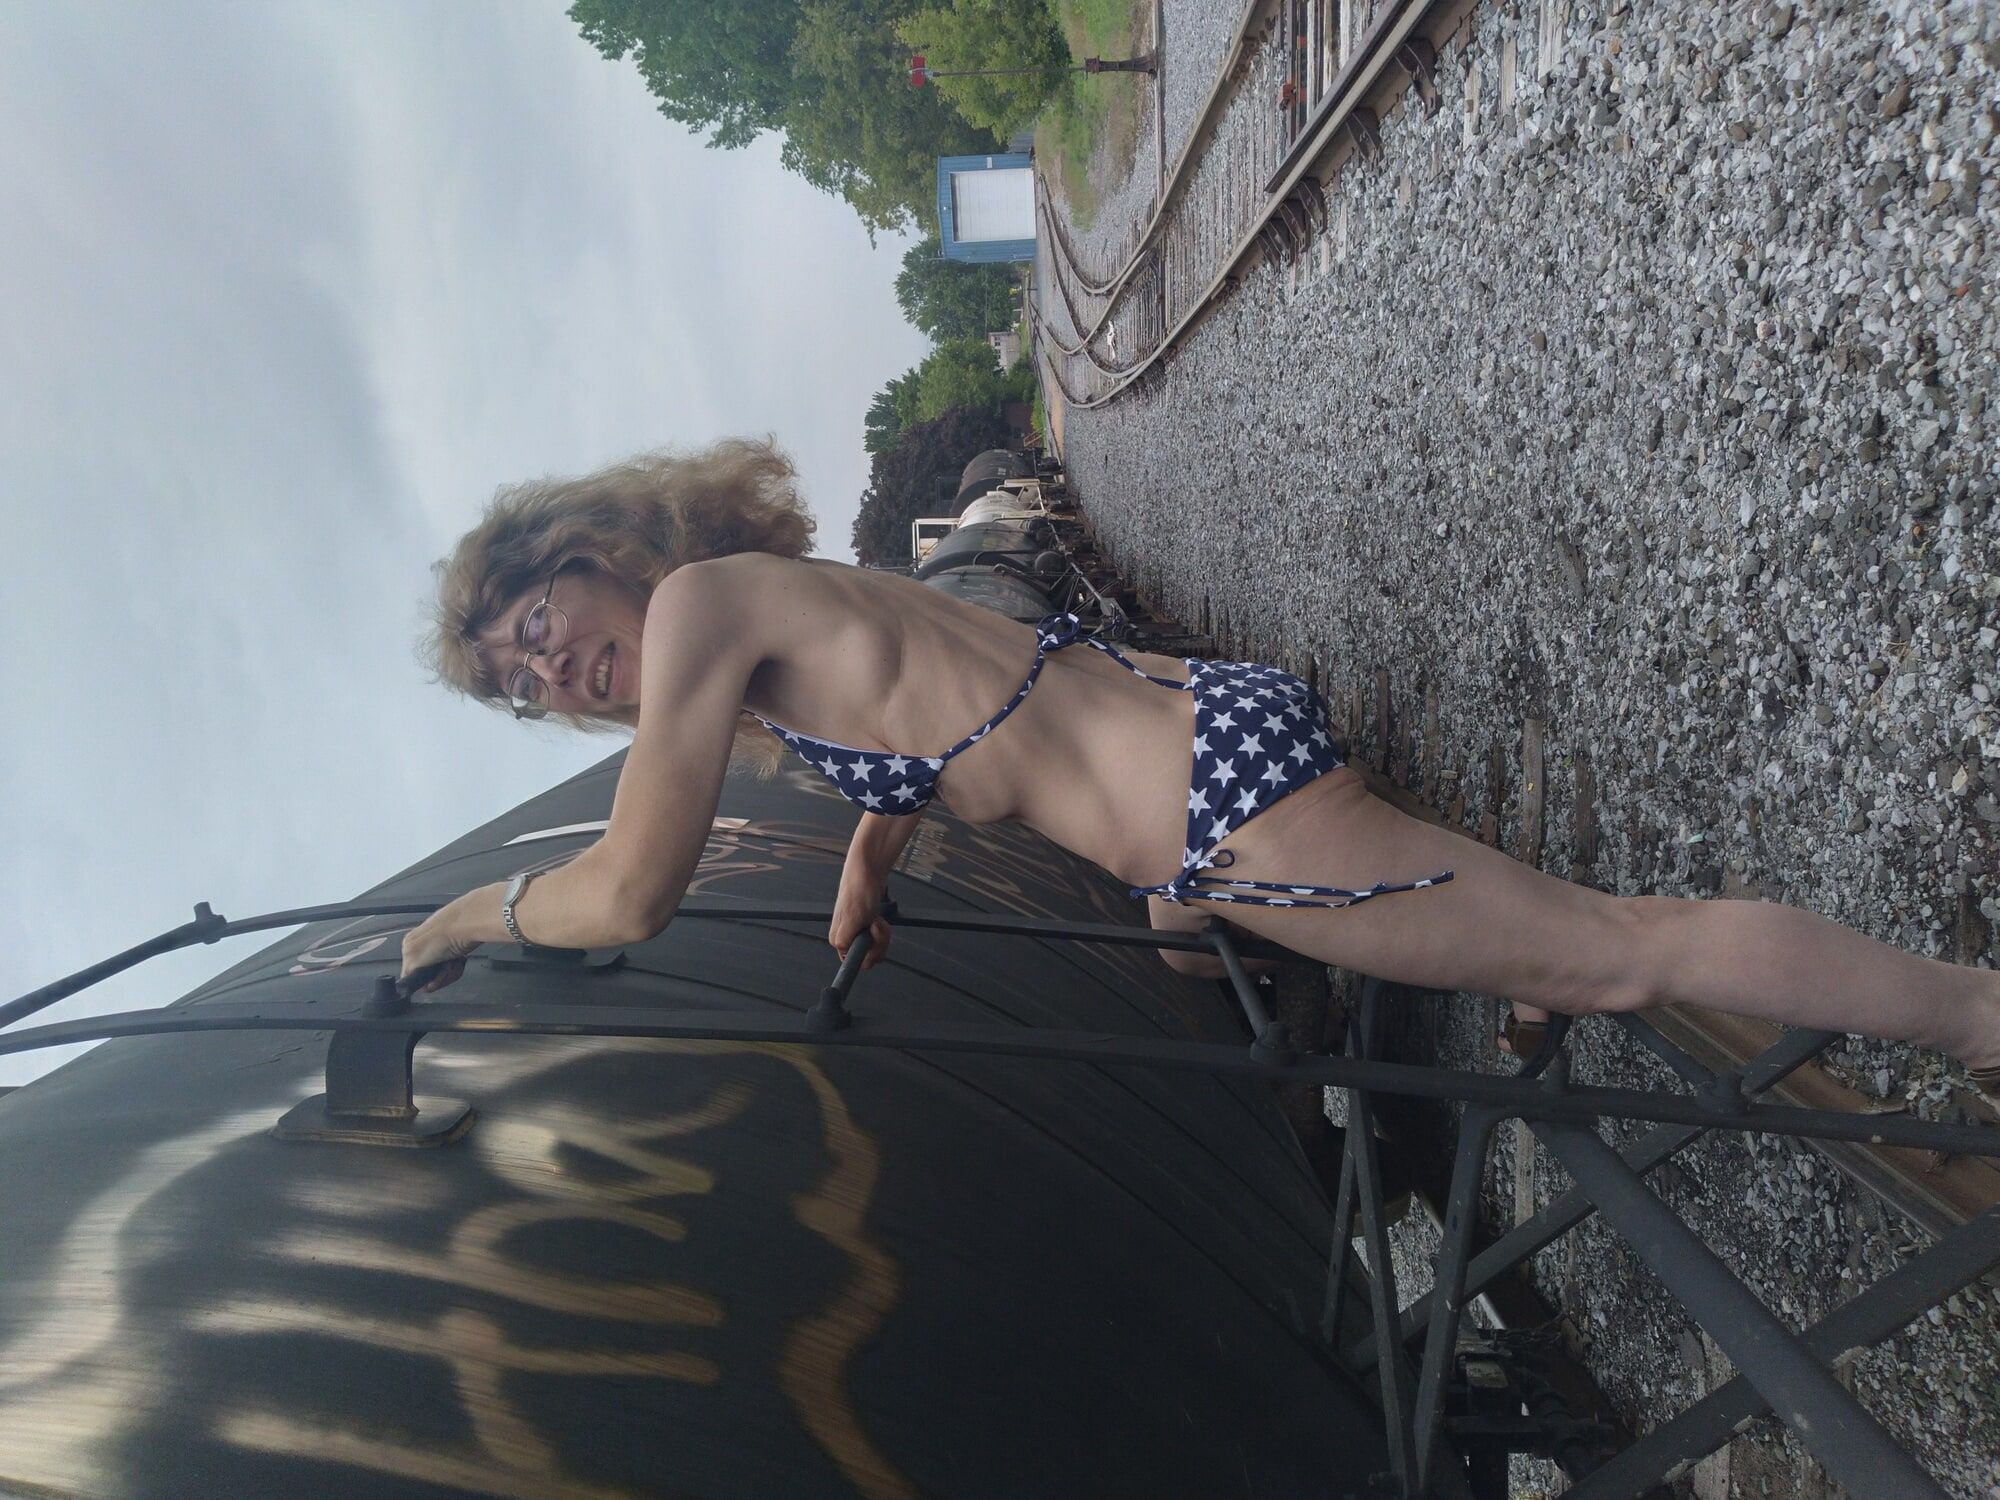 American Train. July 4th release. My best photo set to date. #40